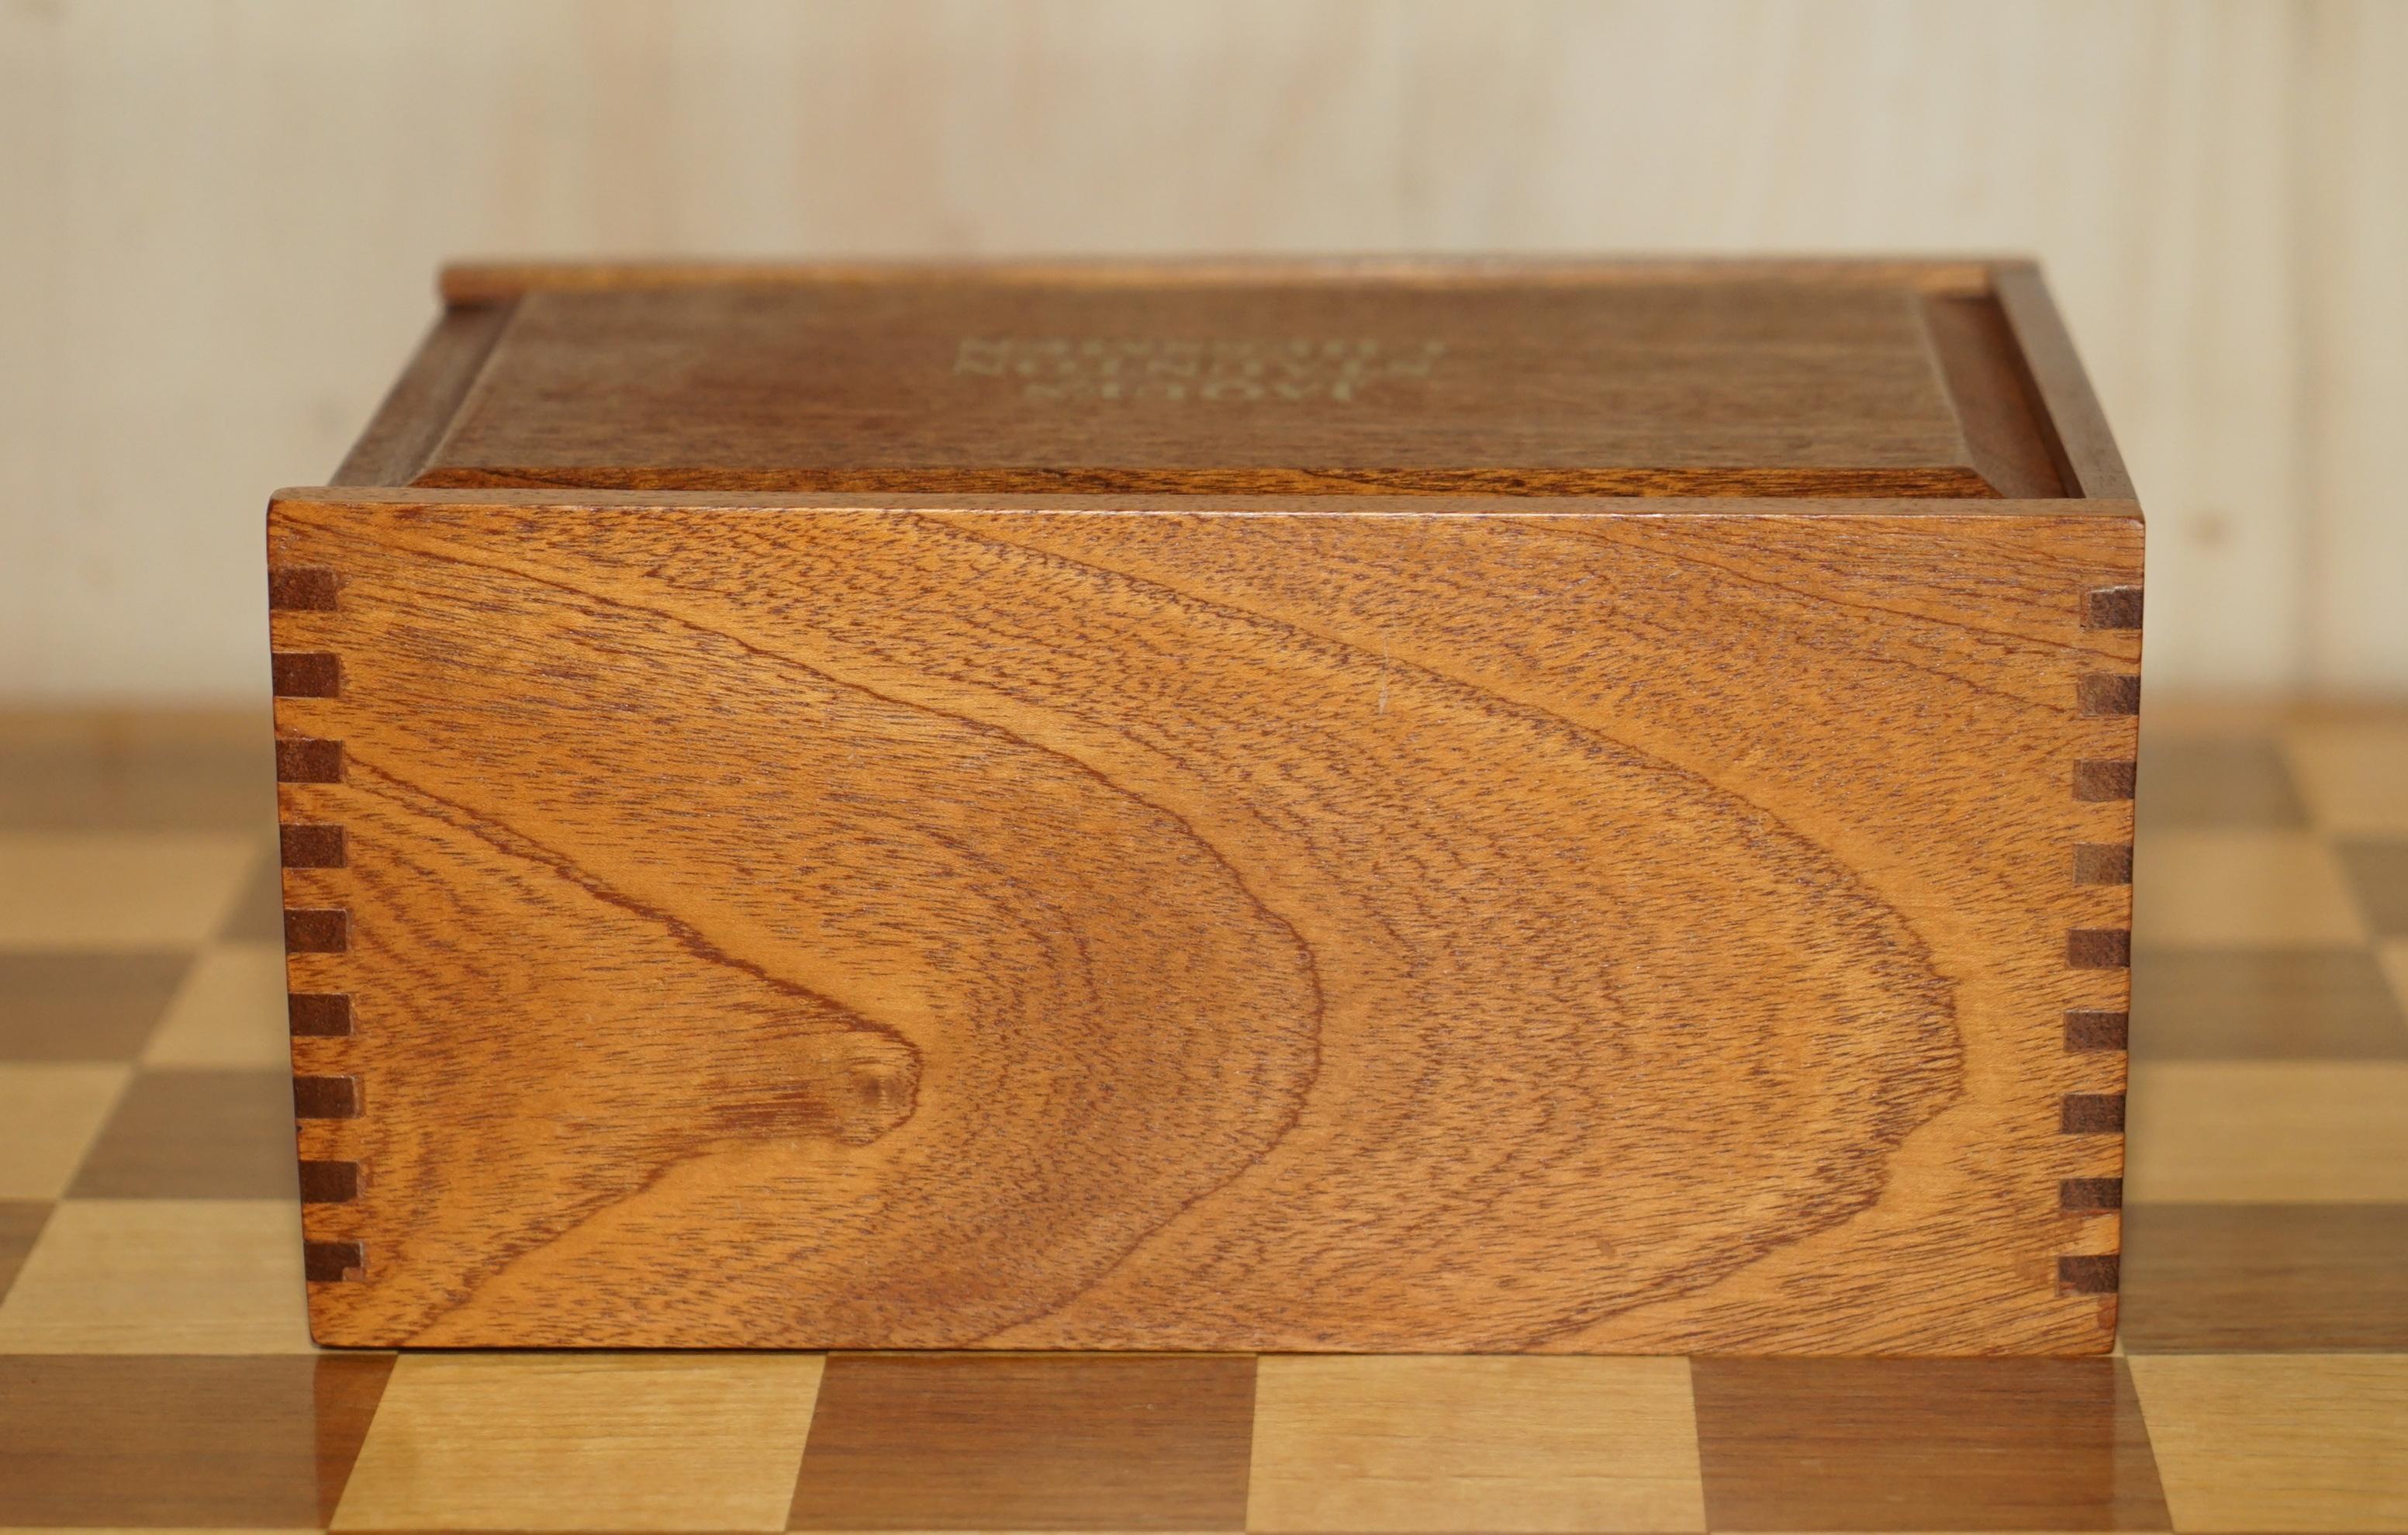 We are delighted to offer for sale this lovely original vintage Jaques of London Chessman Staunton chess set in boxwood.

A well made good looking and very lightly used suite.

We have cleaned waxed and polished them from top to bottom.

Chess